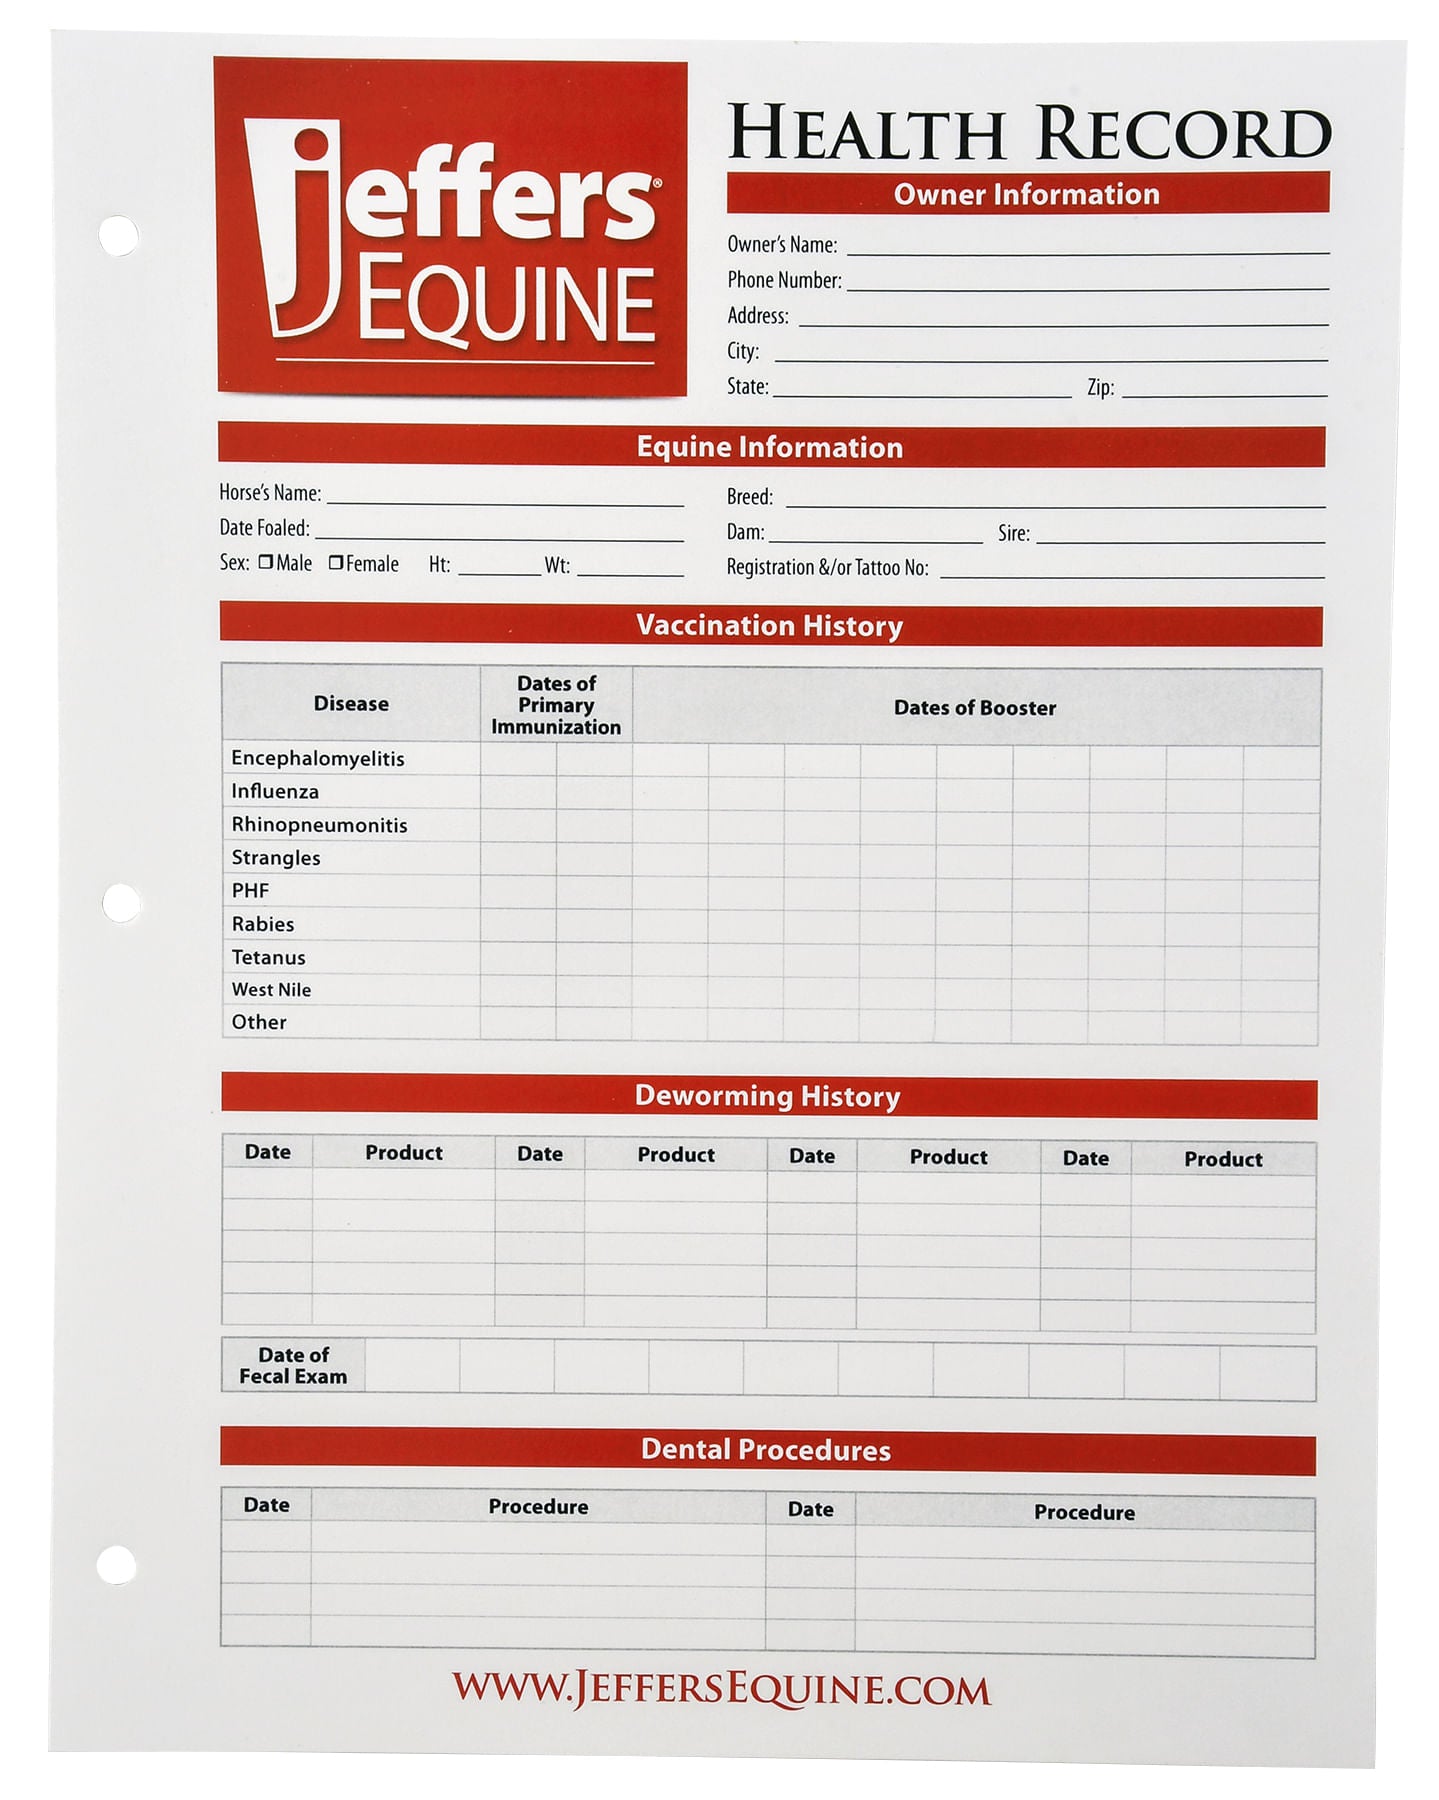 Jeffers Equine Horse Health Records | Document & Track Your Horse Treatments